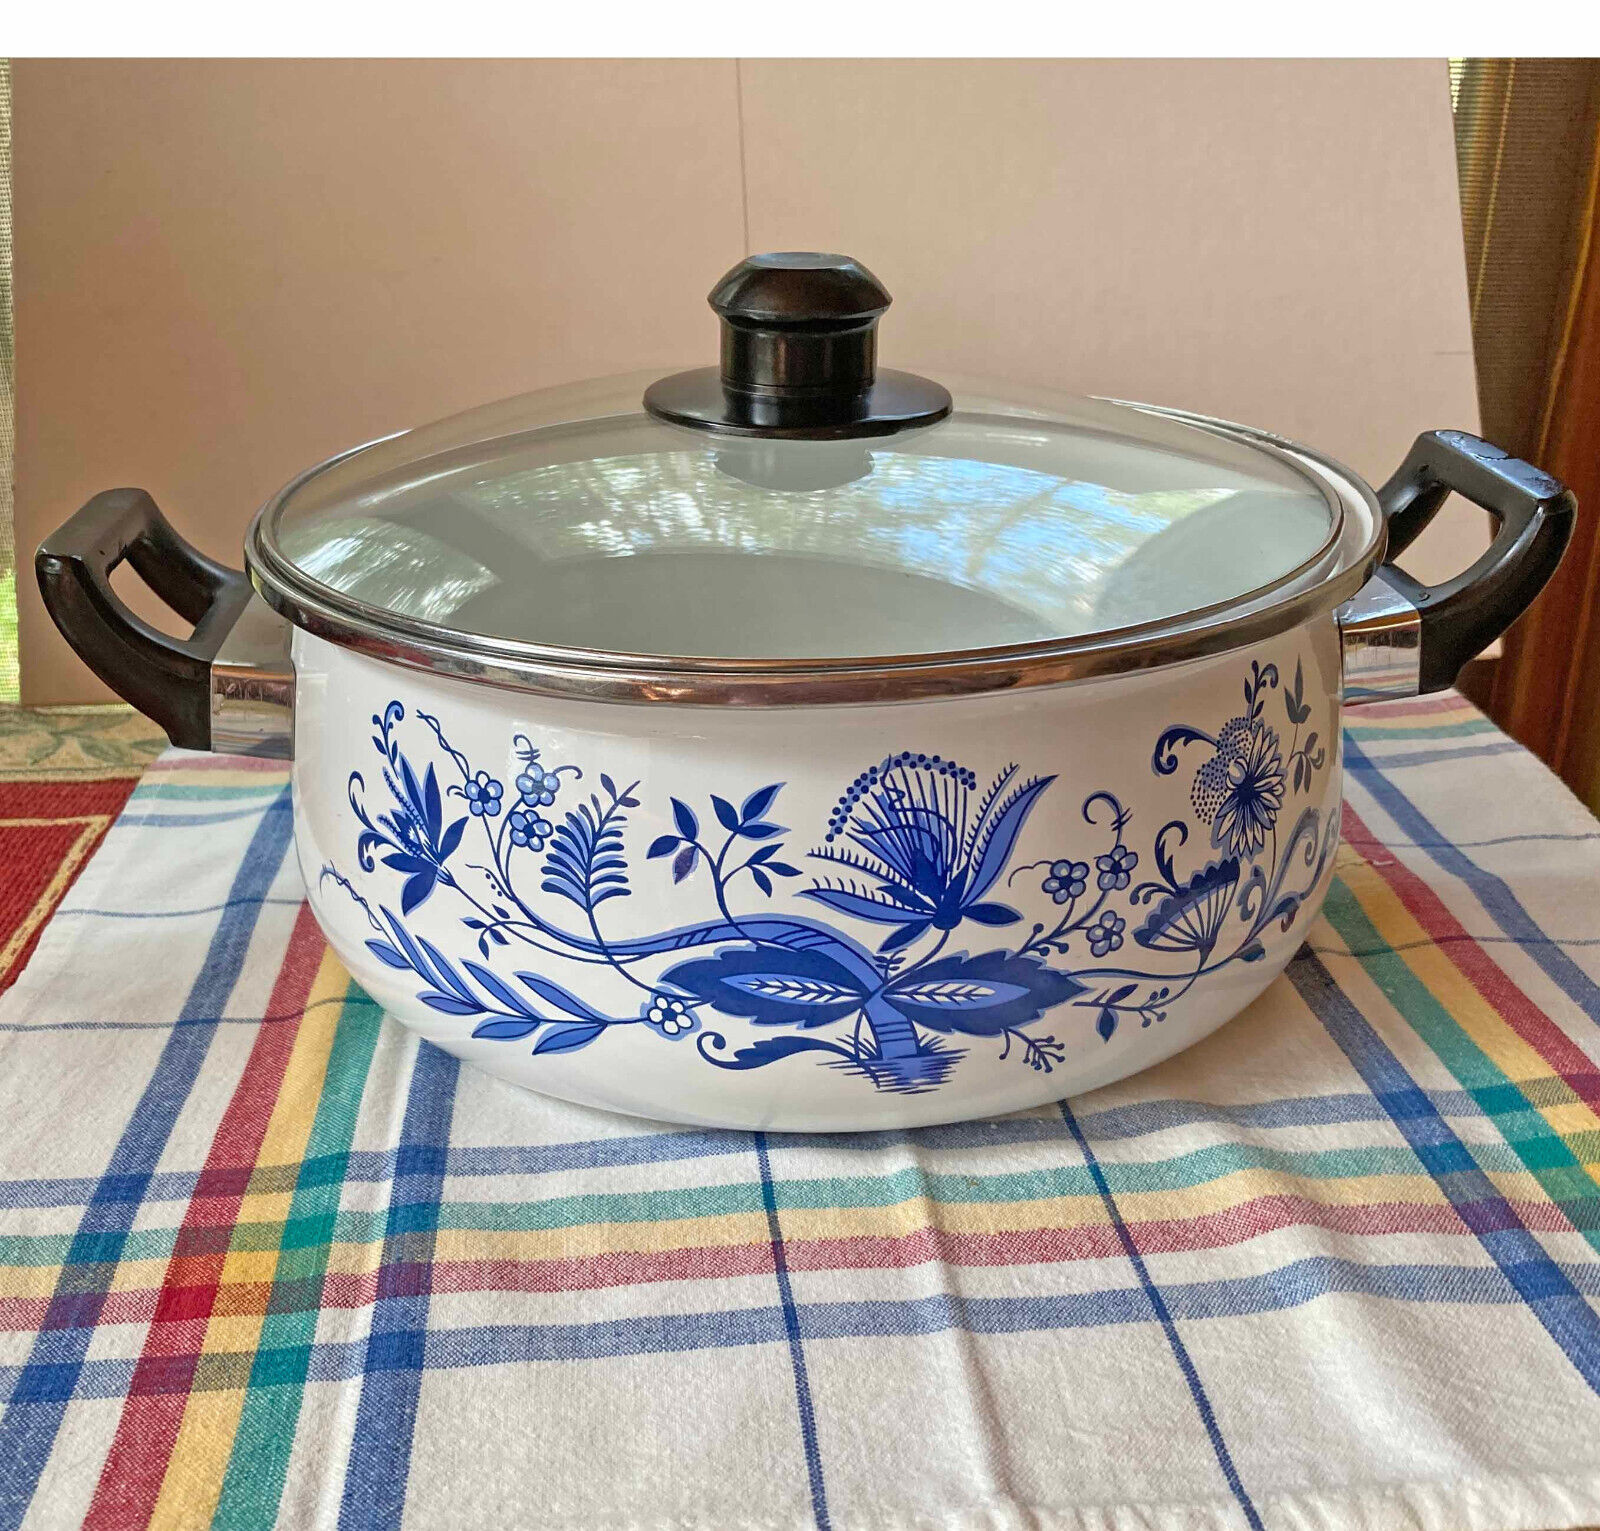 Vintage Blue Onion Danube Style Enamelware Pot With Lid.